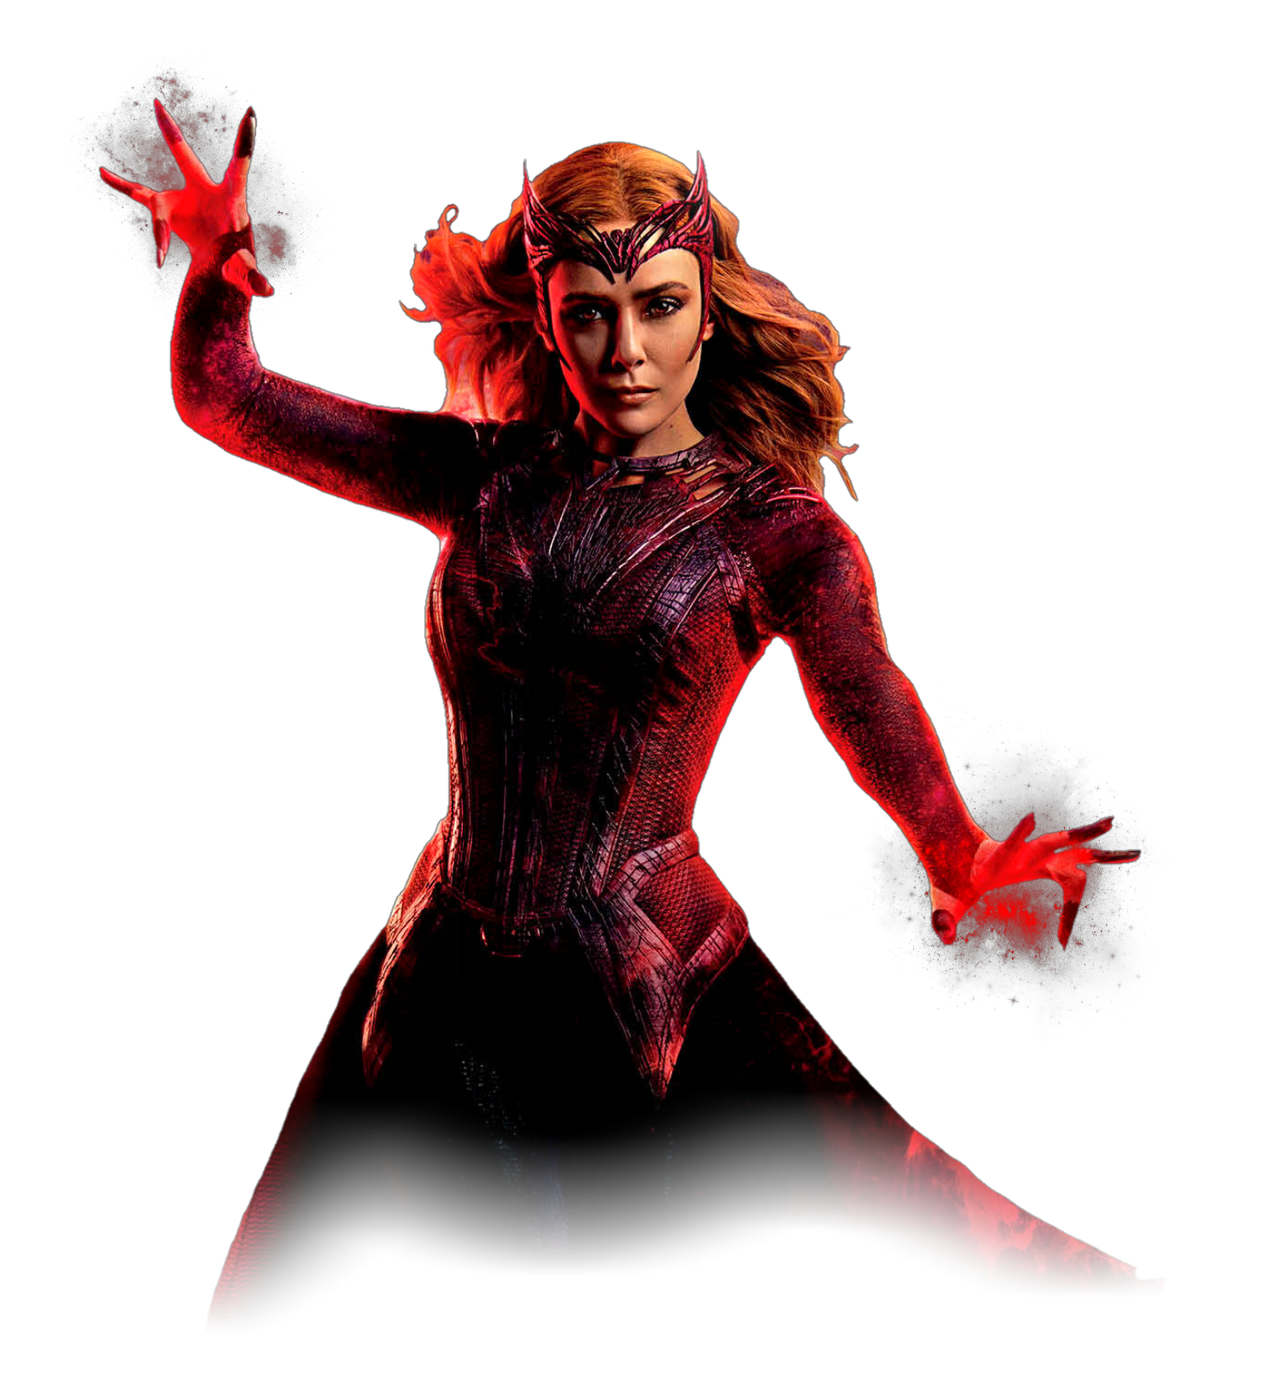 multiverse_of_madness_the_scarlet_witch_png_by_metropolis_hero1125_df51bi7-fullview.png